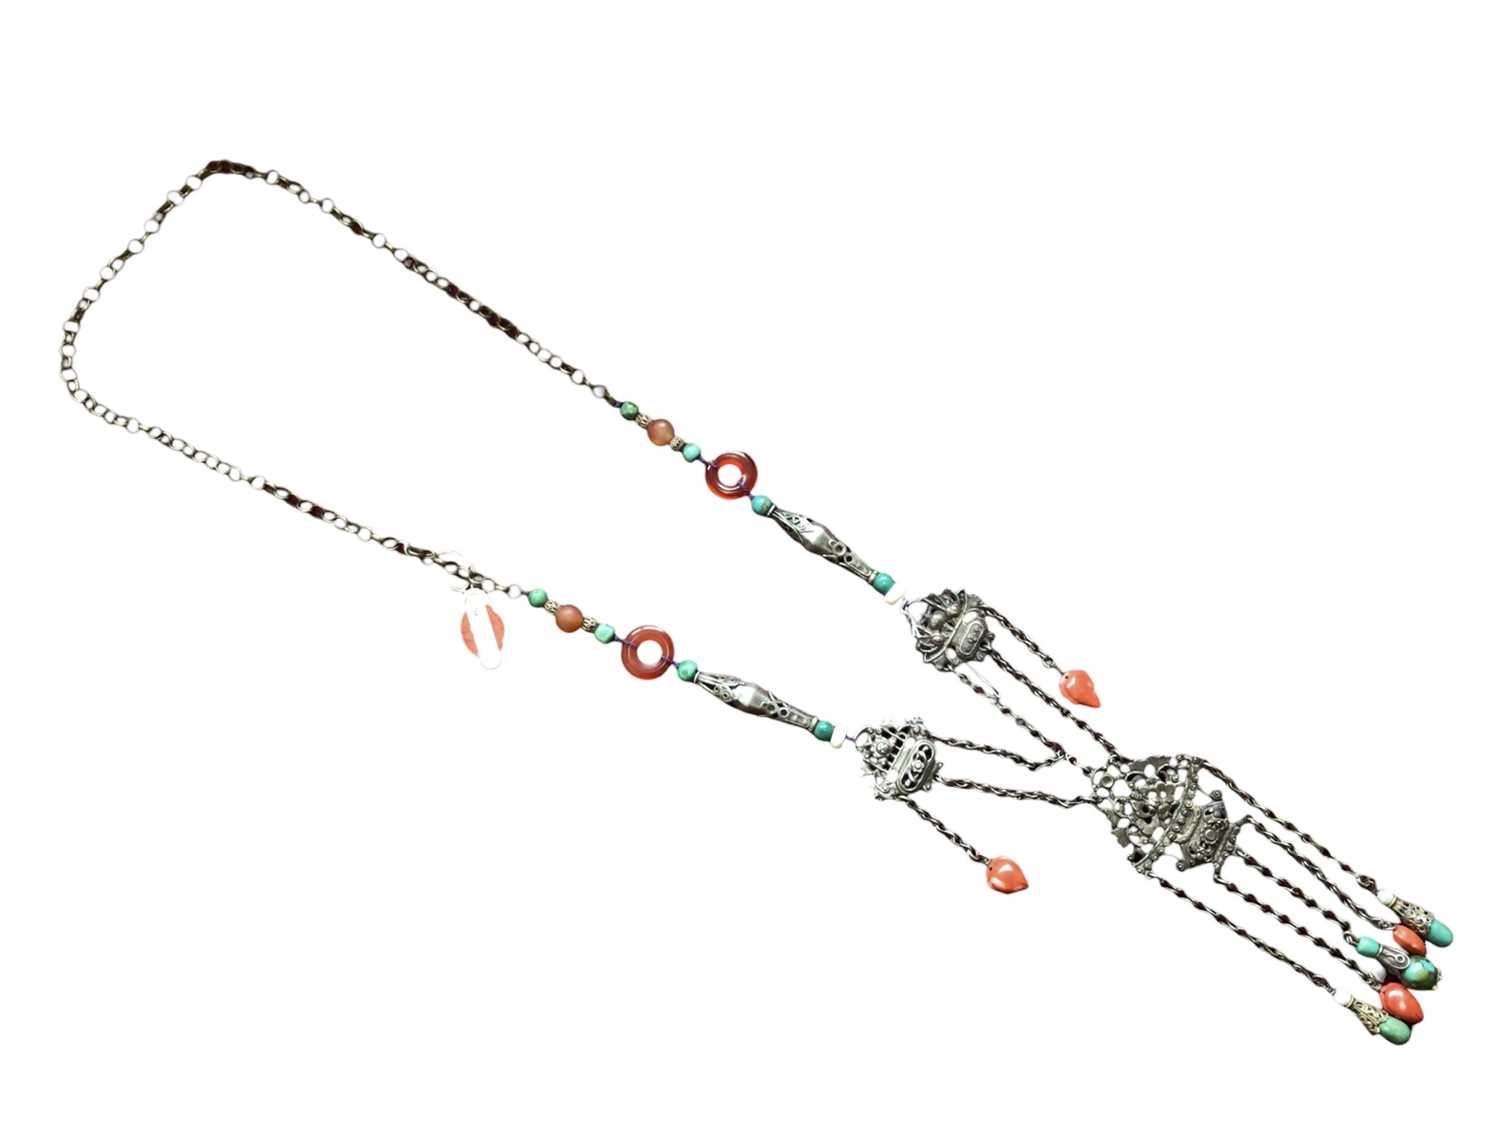 Lot 2 - Old Chinese white metal necklace with pierced floral scroll panels, carved coral and turquoise drops suspended from chains and further beads interspaced on the chain.